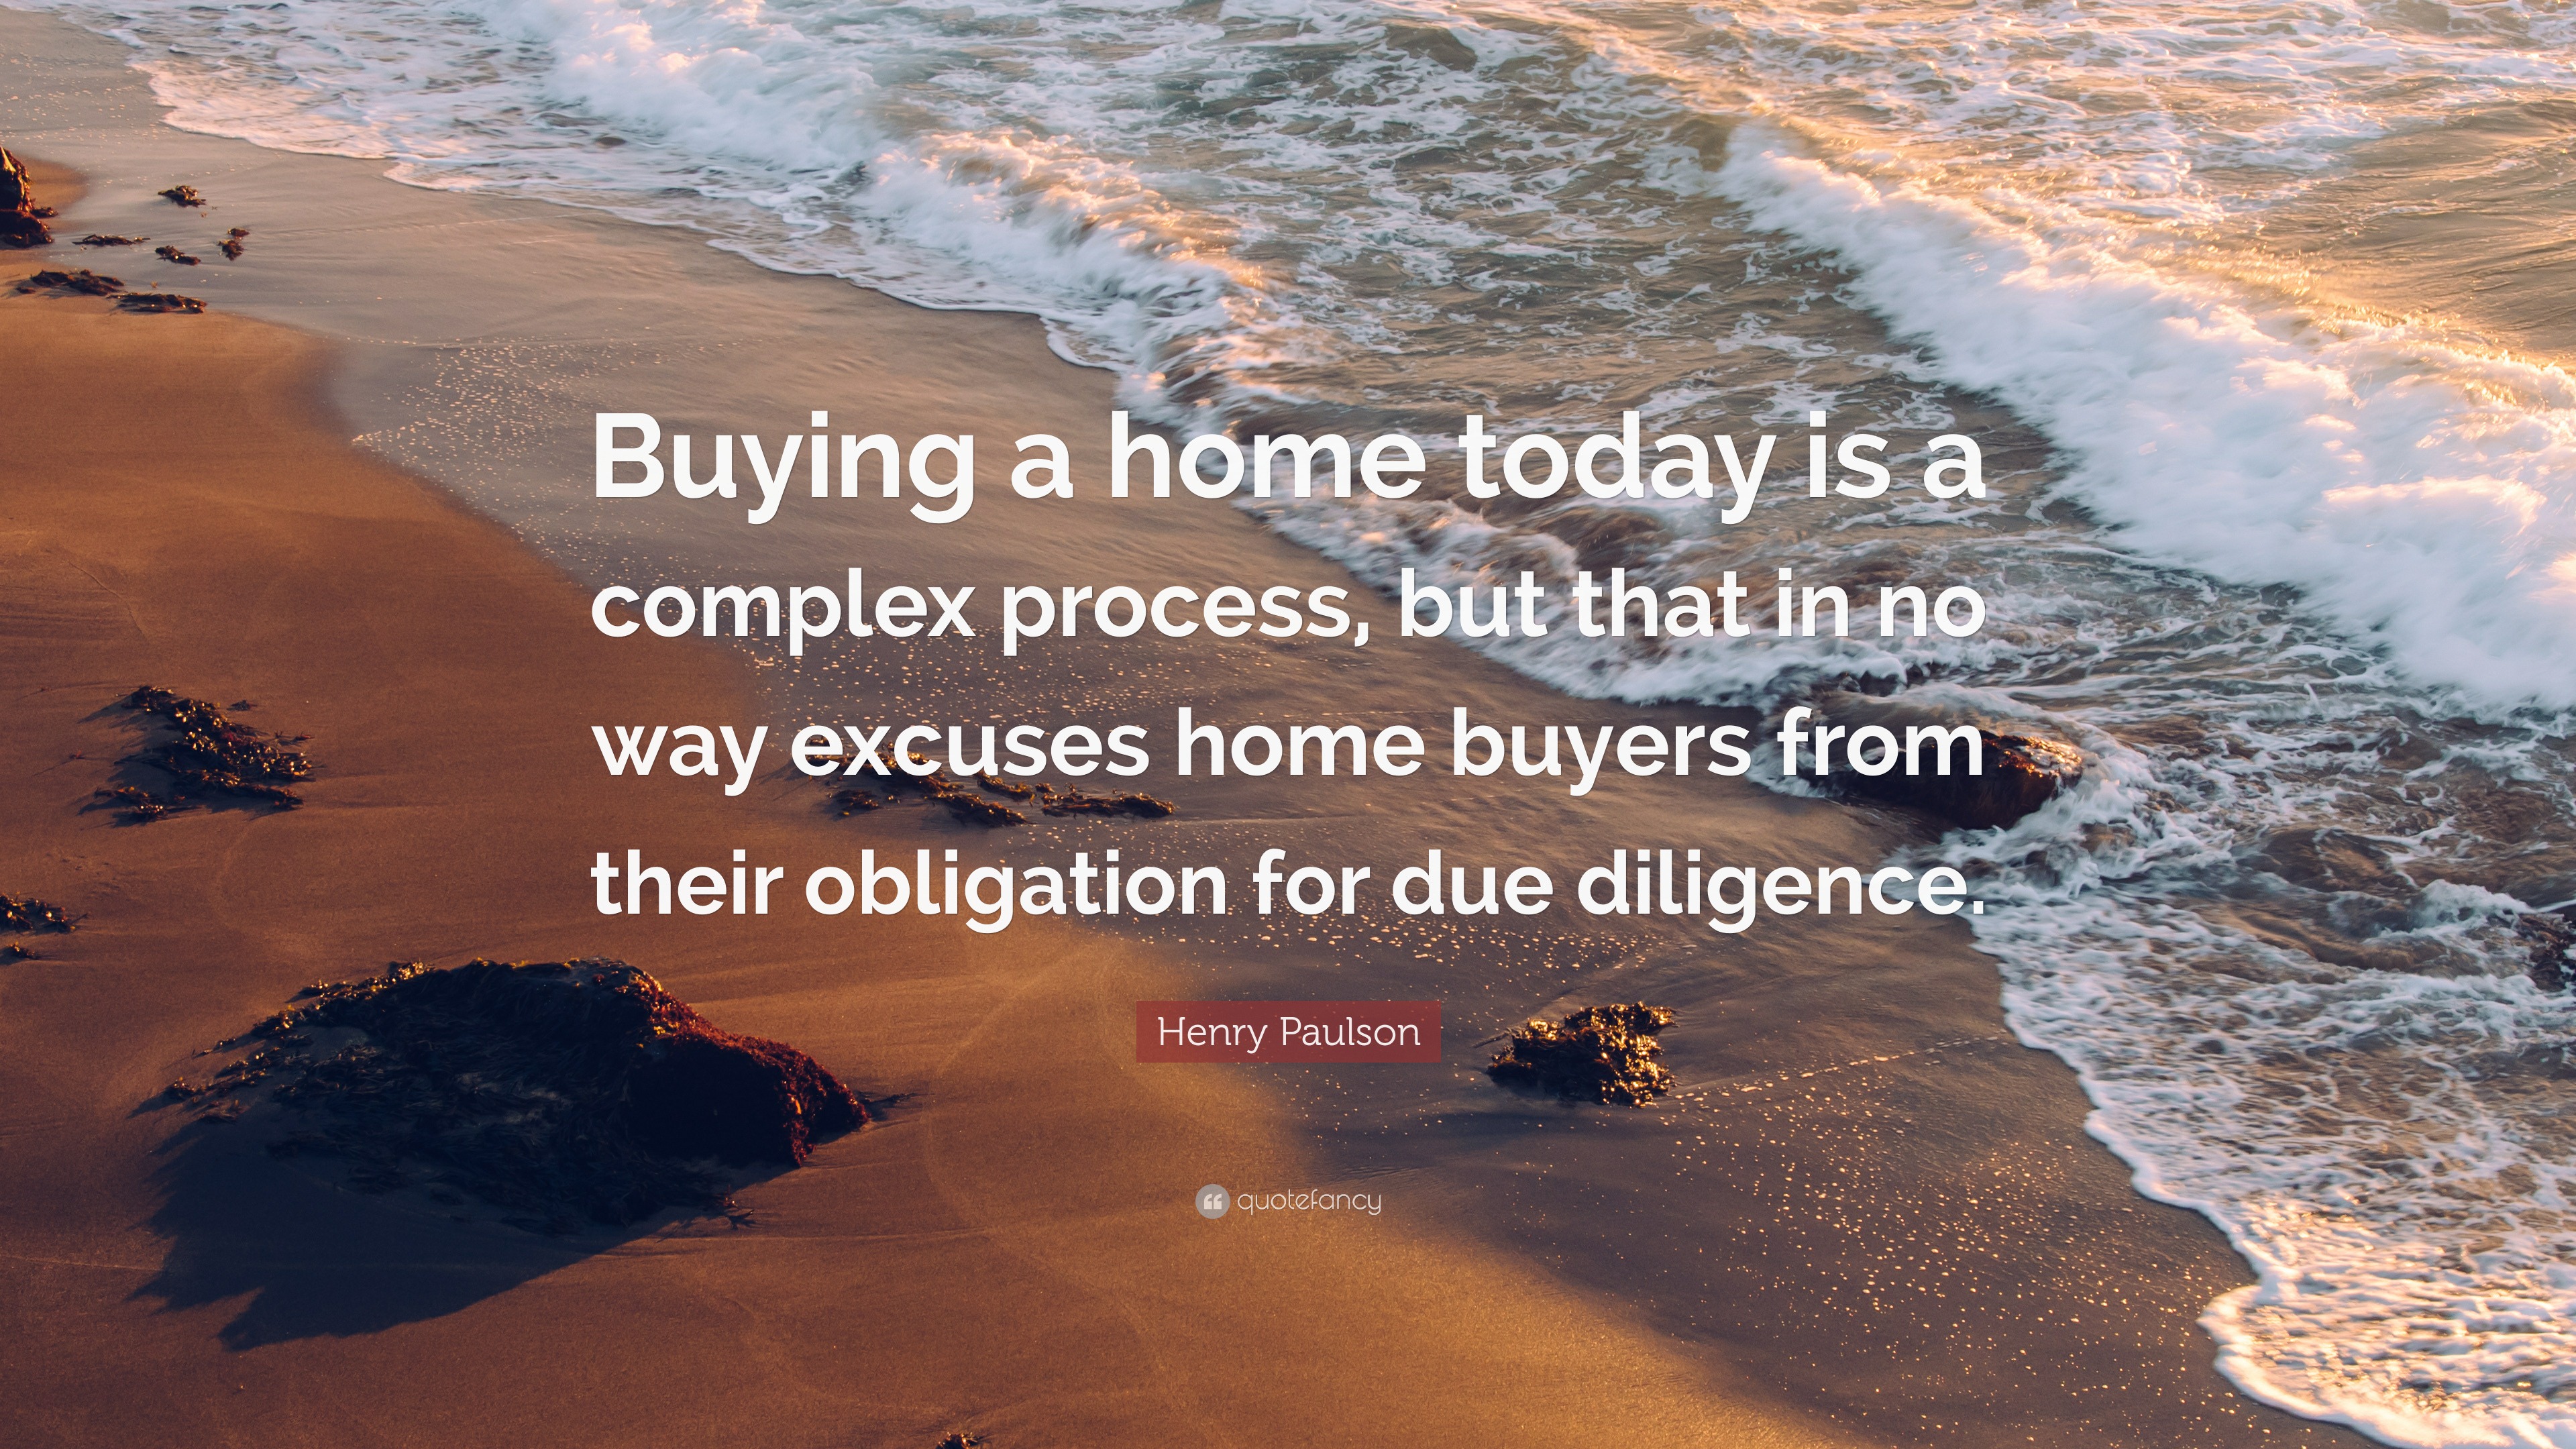 Henry Paulson Quote: “Buying a home today is a complex process, but